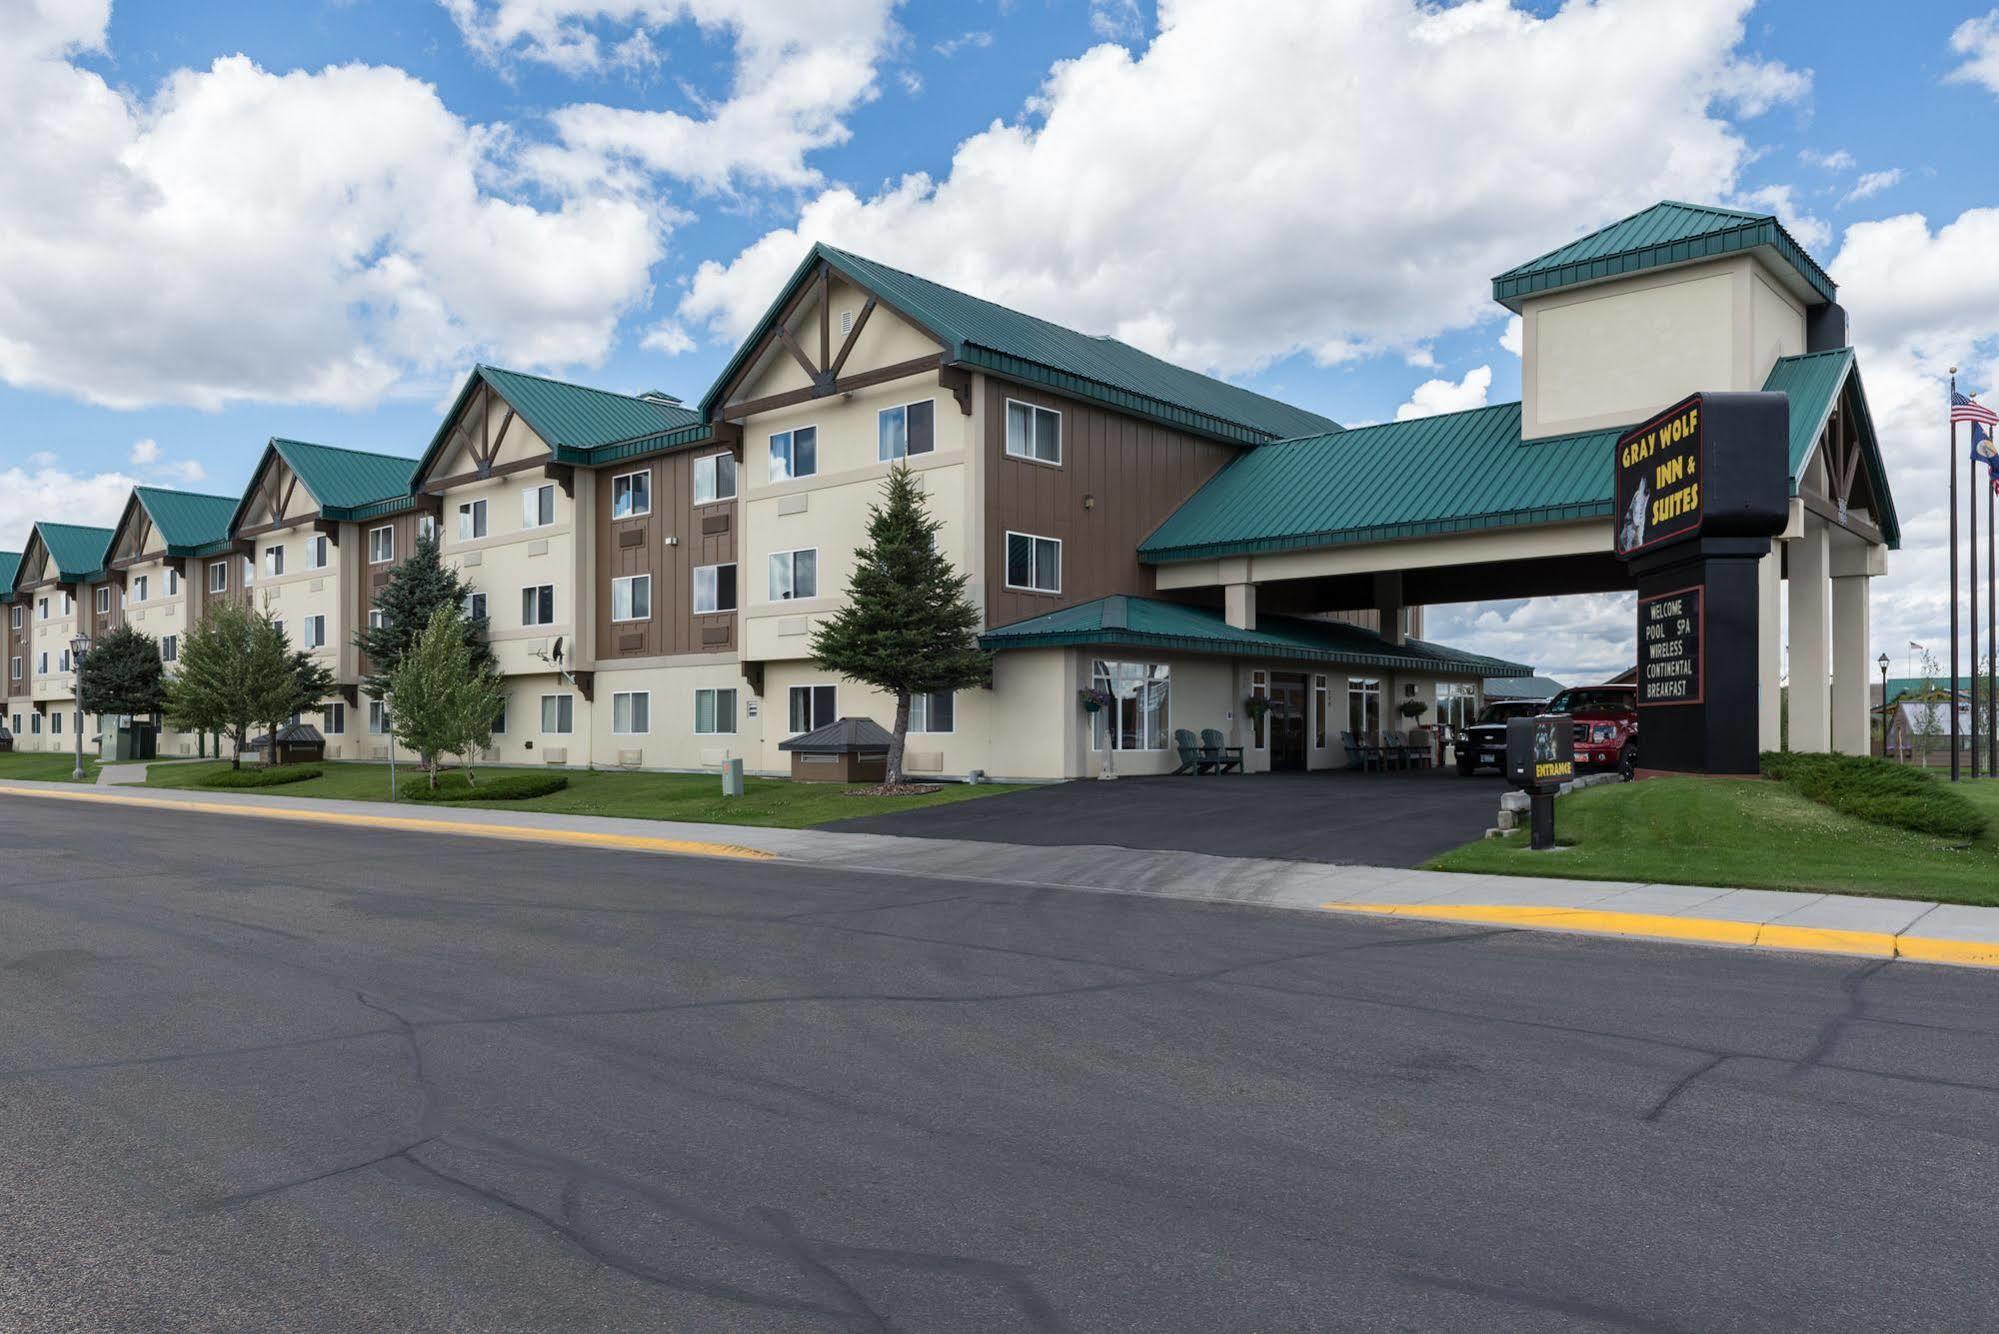 Gray Wolf Inn & Suites West Yellowstone Exterior photo